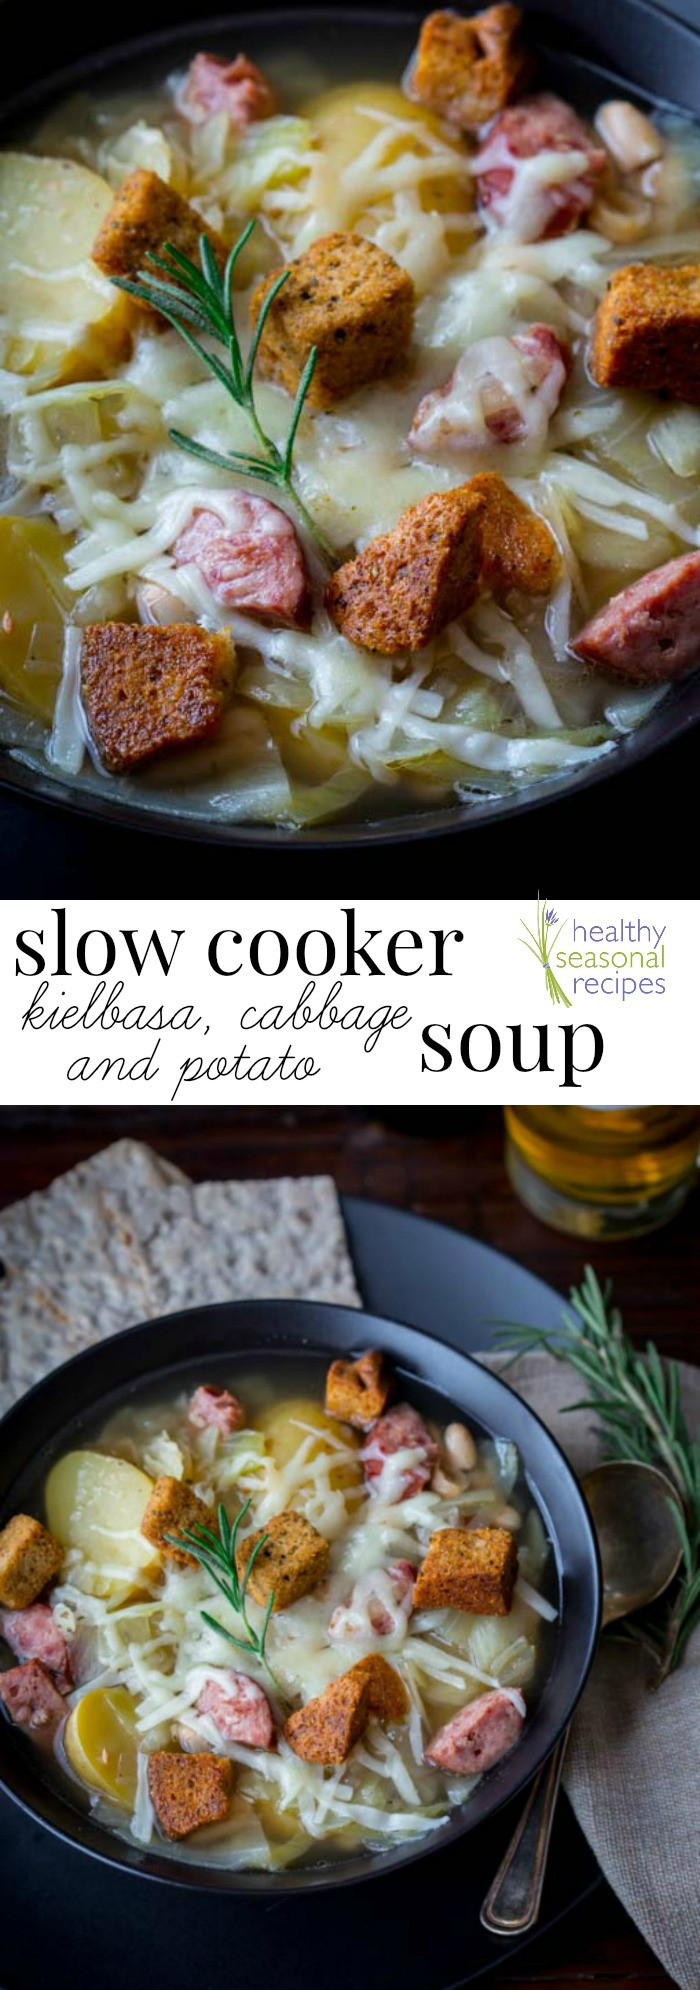 Slow Cooker Healthy Recipes
 slow cooker kielbasa cabbage and potato soup Healthy